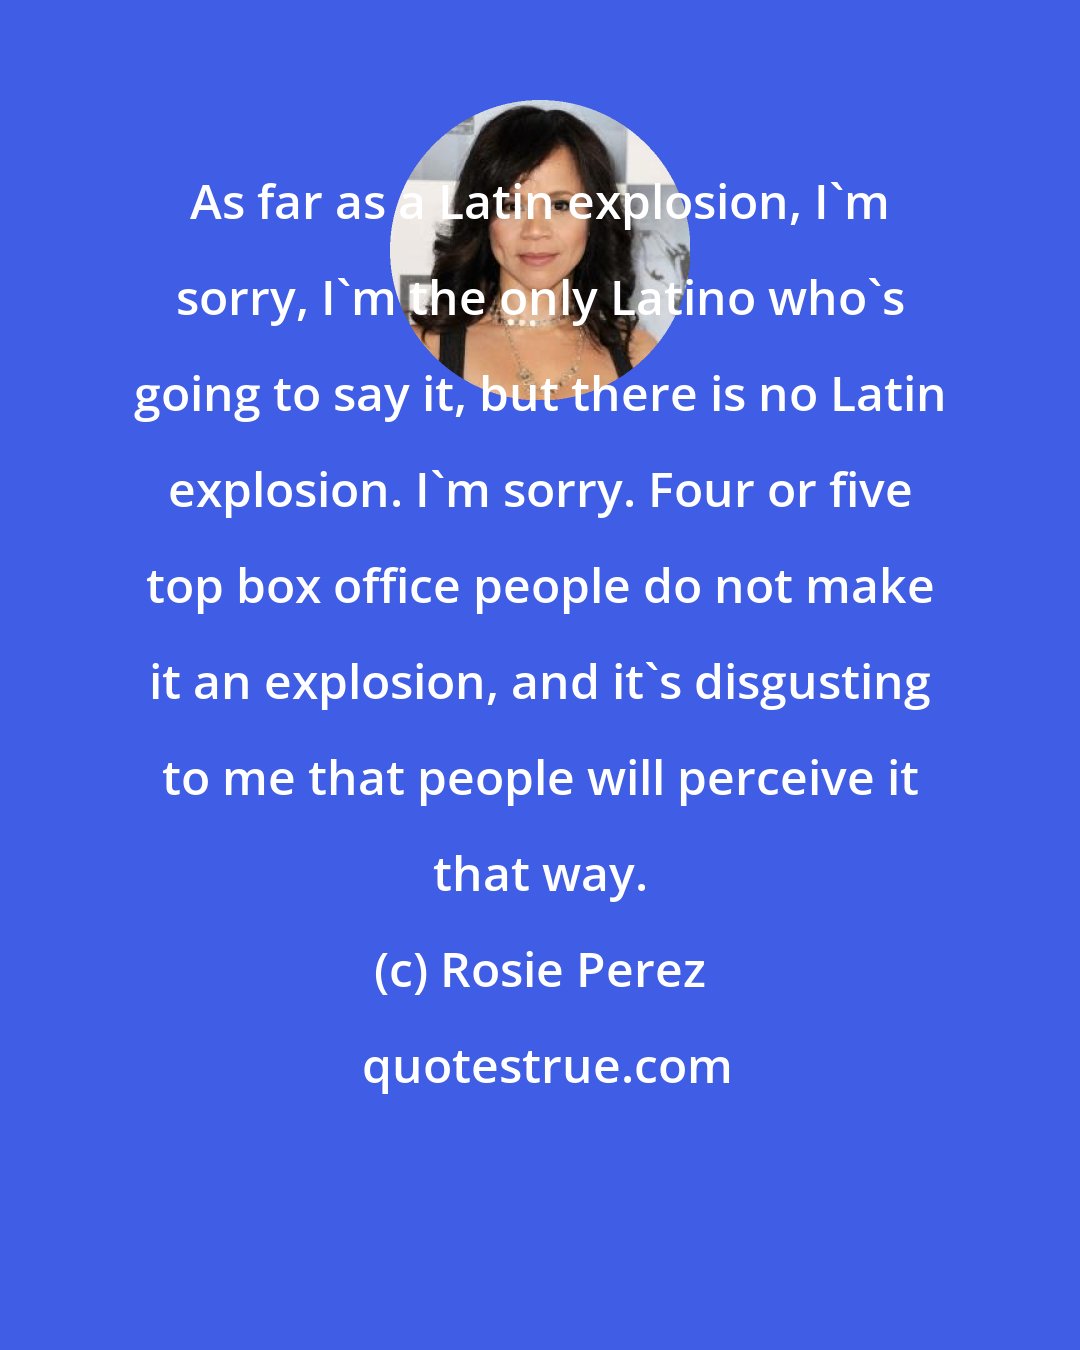 Rosie Perez: As far as a Latin explosion, I'm sorry, I'm the only Latino who's going to say it, but there is no Latin explosion. I'm sorry. Four or five top box office people do not make it an explosion, and it's disgusting to me that people will perceive it that way.